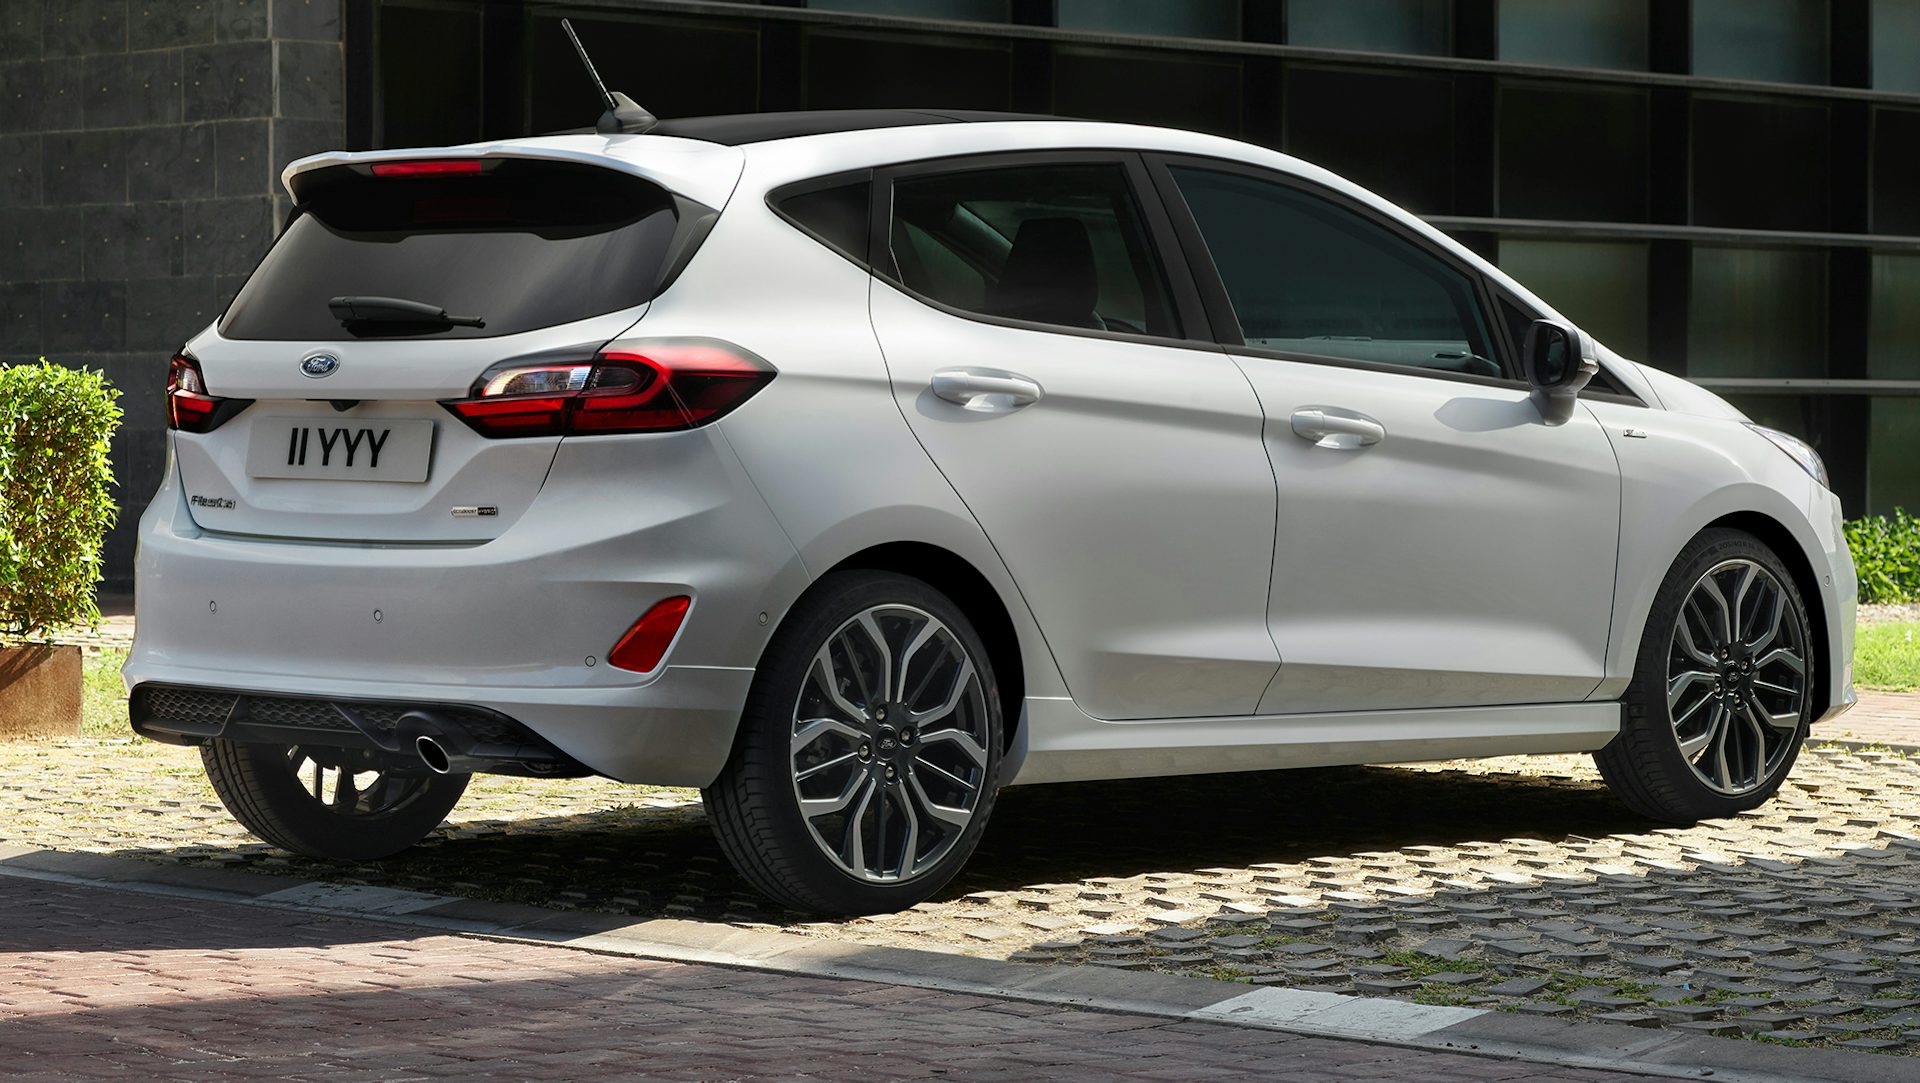 2022 Ford Fiesta and Fiesta ST facelift revealed price, specs and